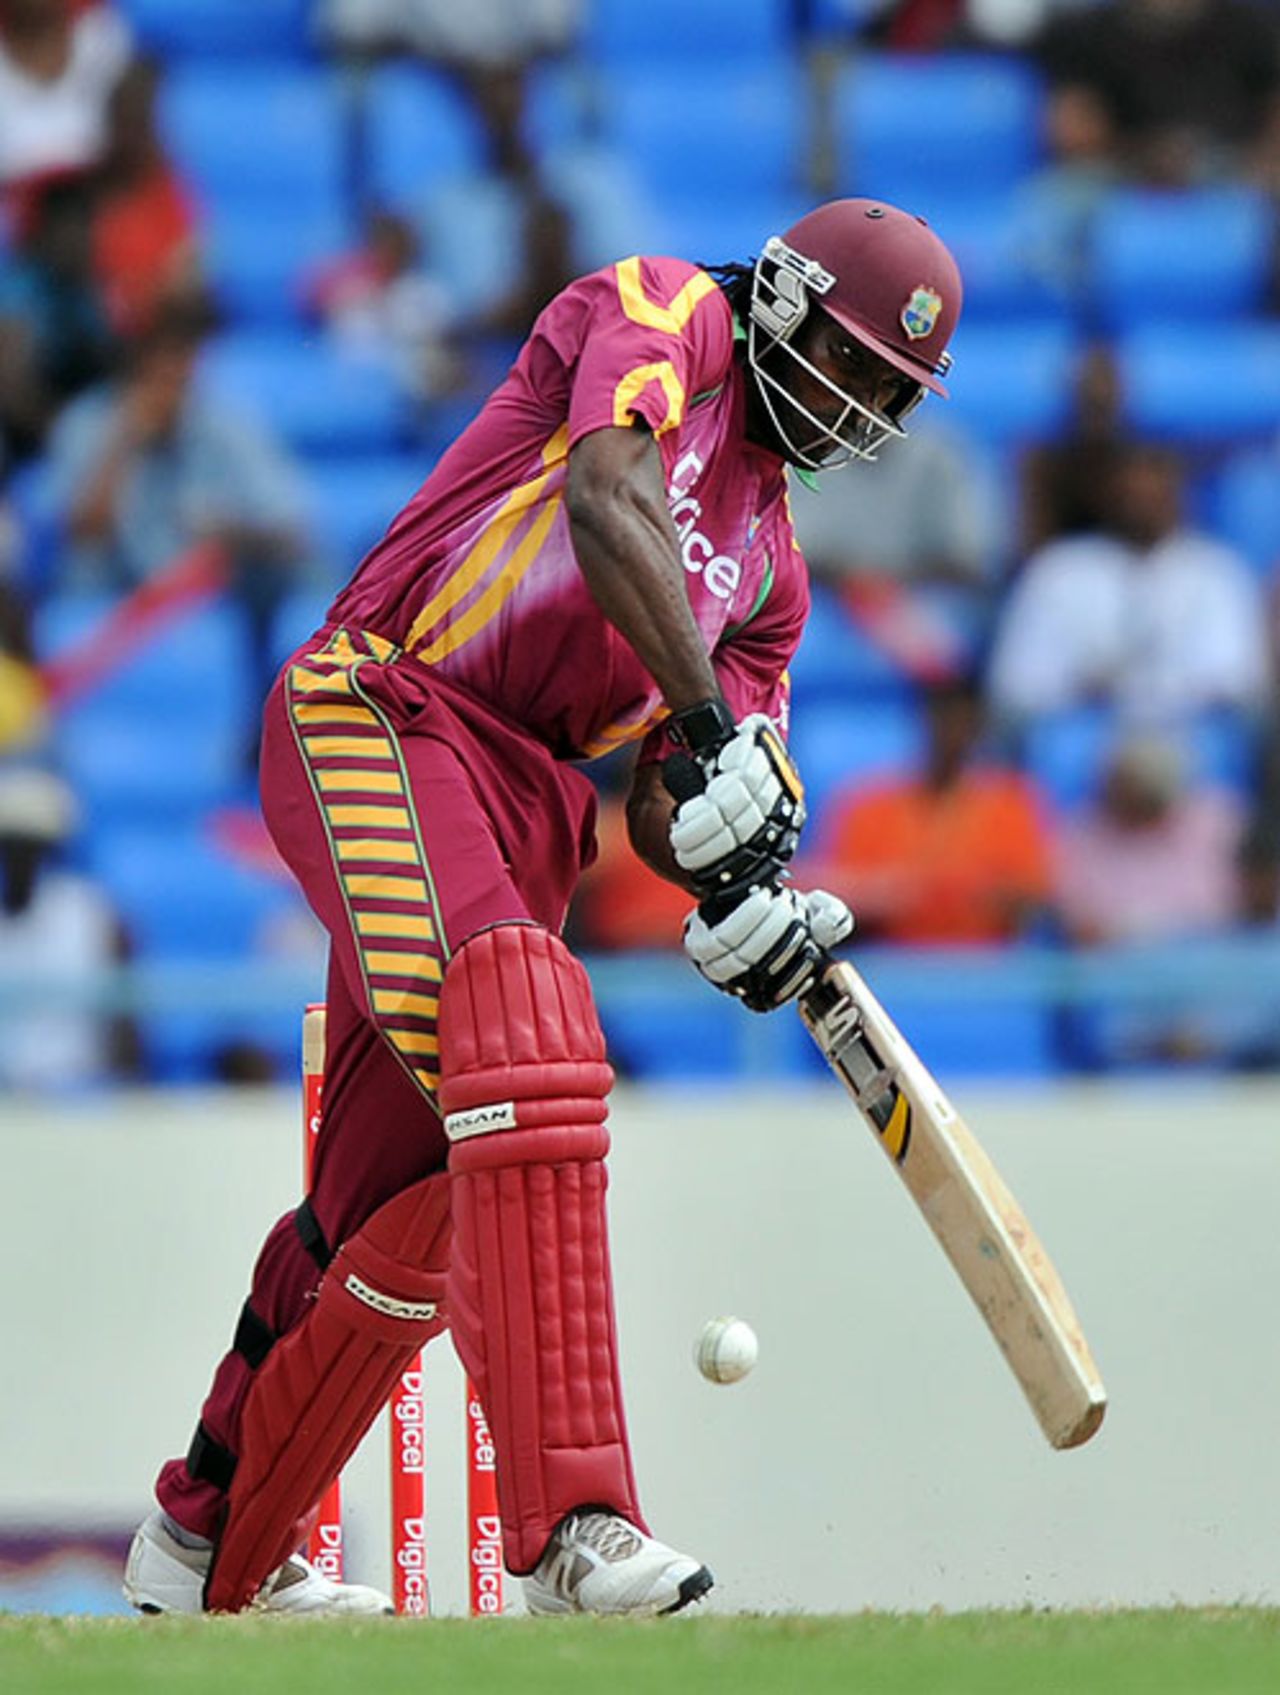 Chris Gayle made 45 from 39 balls in West Indies' reply, West Indies v South Africa, 1st ODI, Antigua, May 22, 2010